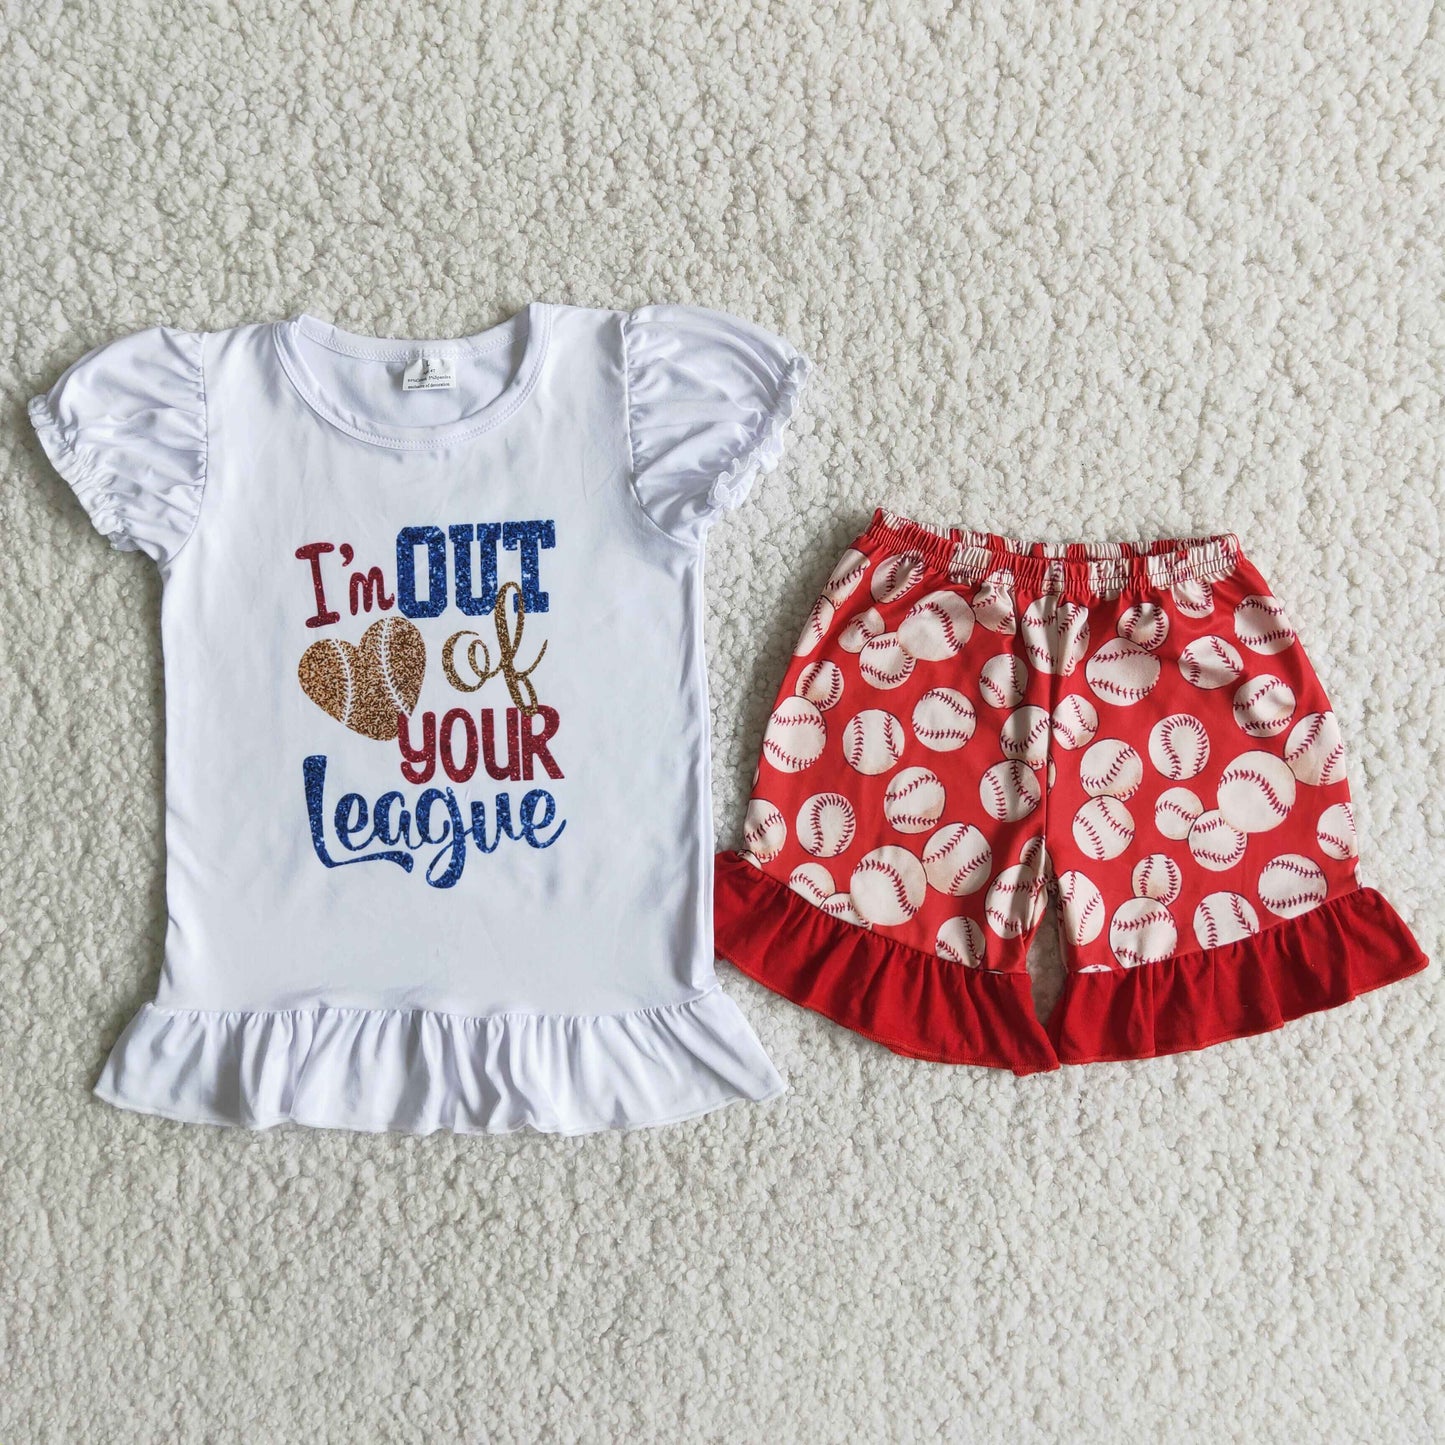 I'm out of your league baseball print summer outfits  A2-2